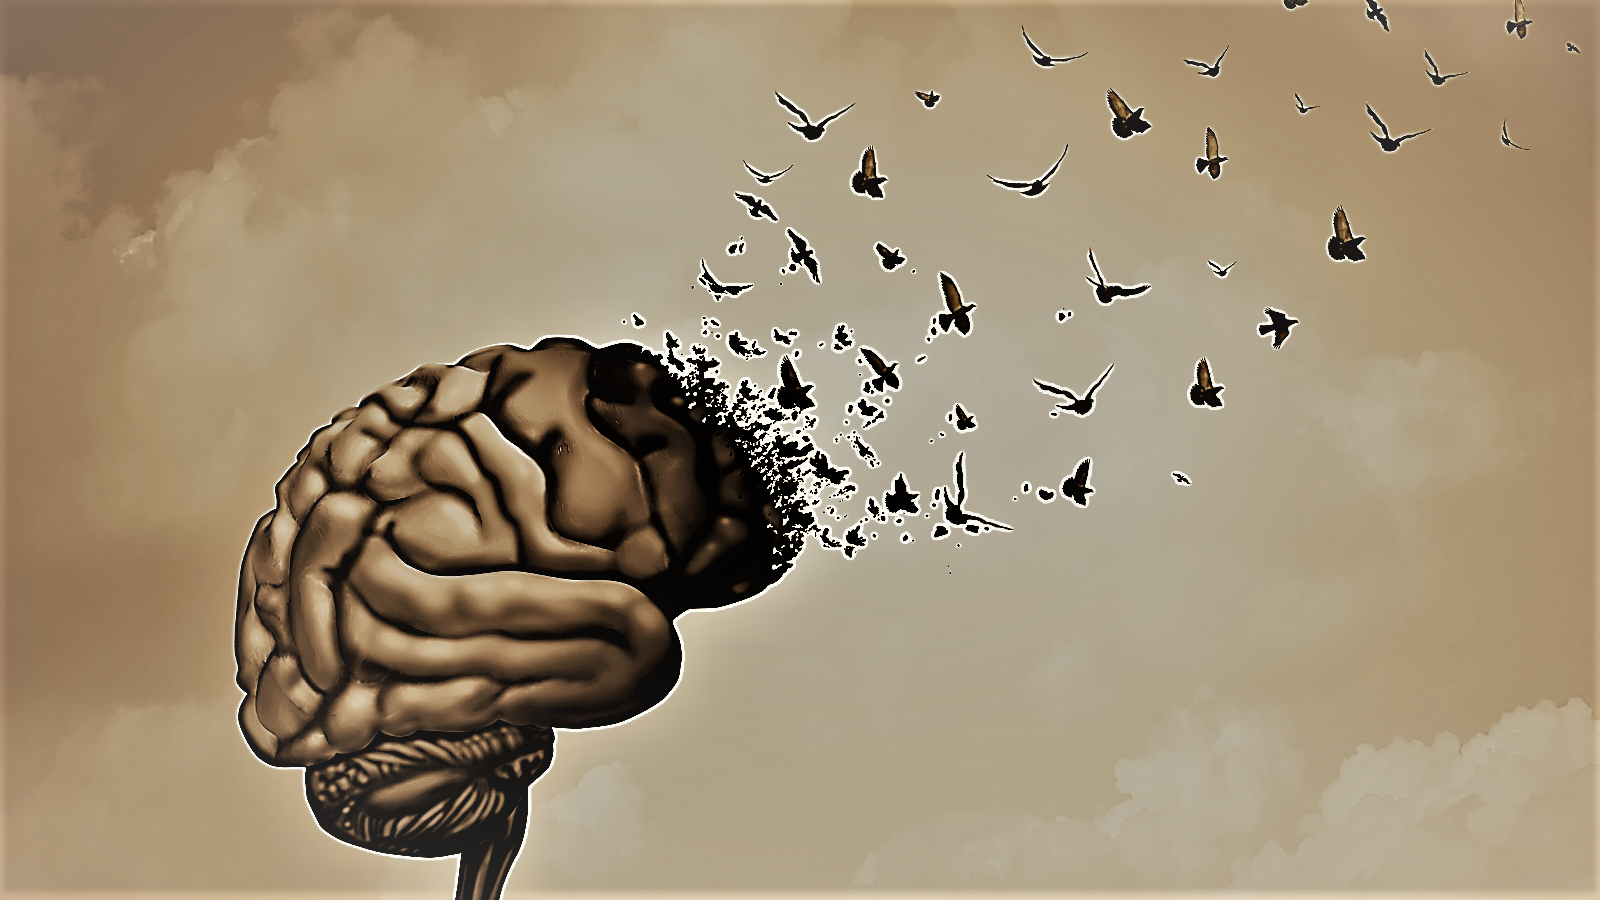 Brain with birds flying out of it